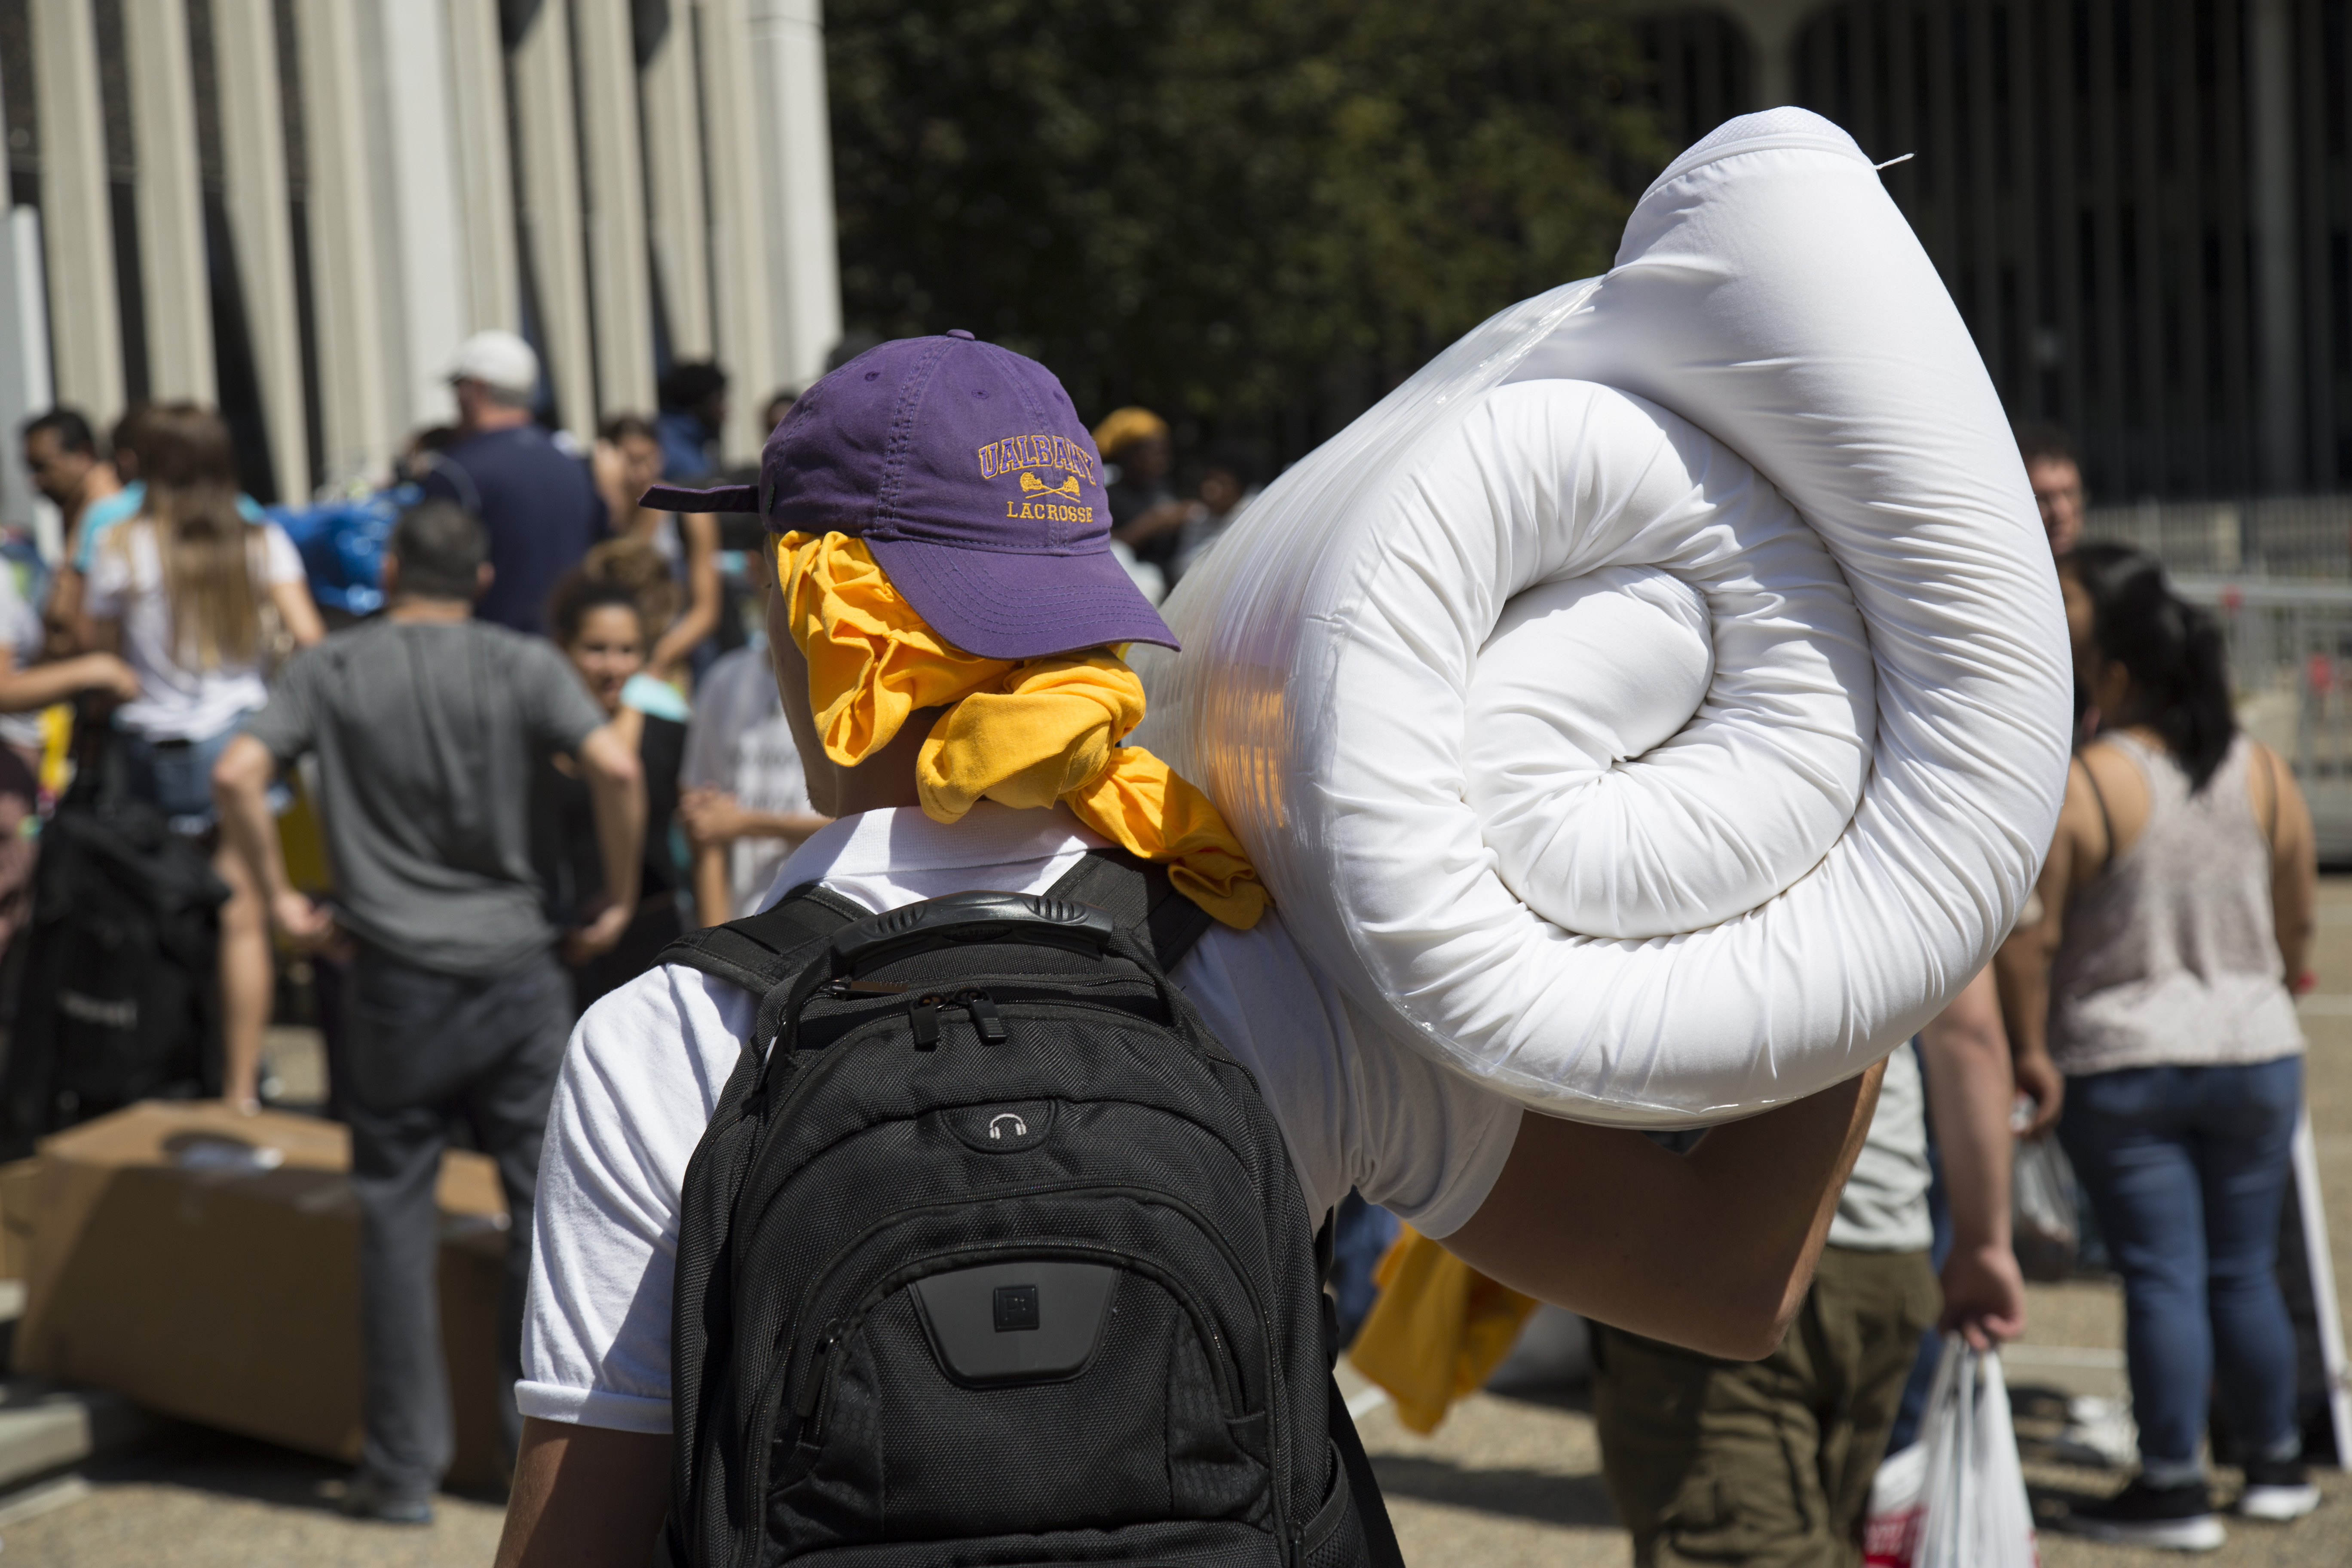 A student holds a mattress topper on their shoulder, wearing a UAlbany lacrosse hat and black backpack